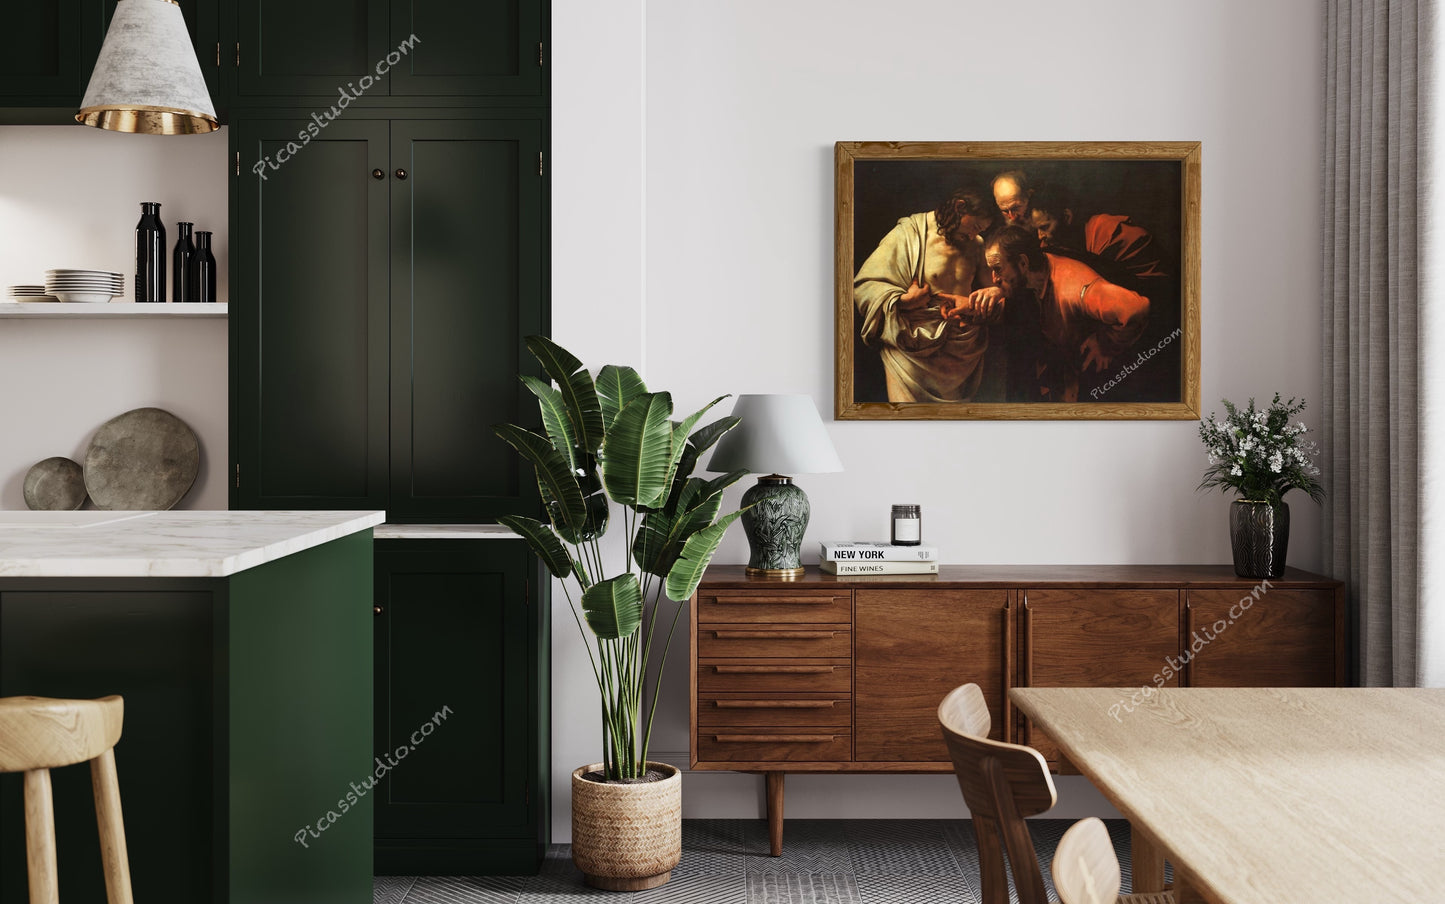 The Incredulity of Saint Thomas by Caravaggio Oil Painting Hand Painted Art on Canvas Wall Decor Unframed